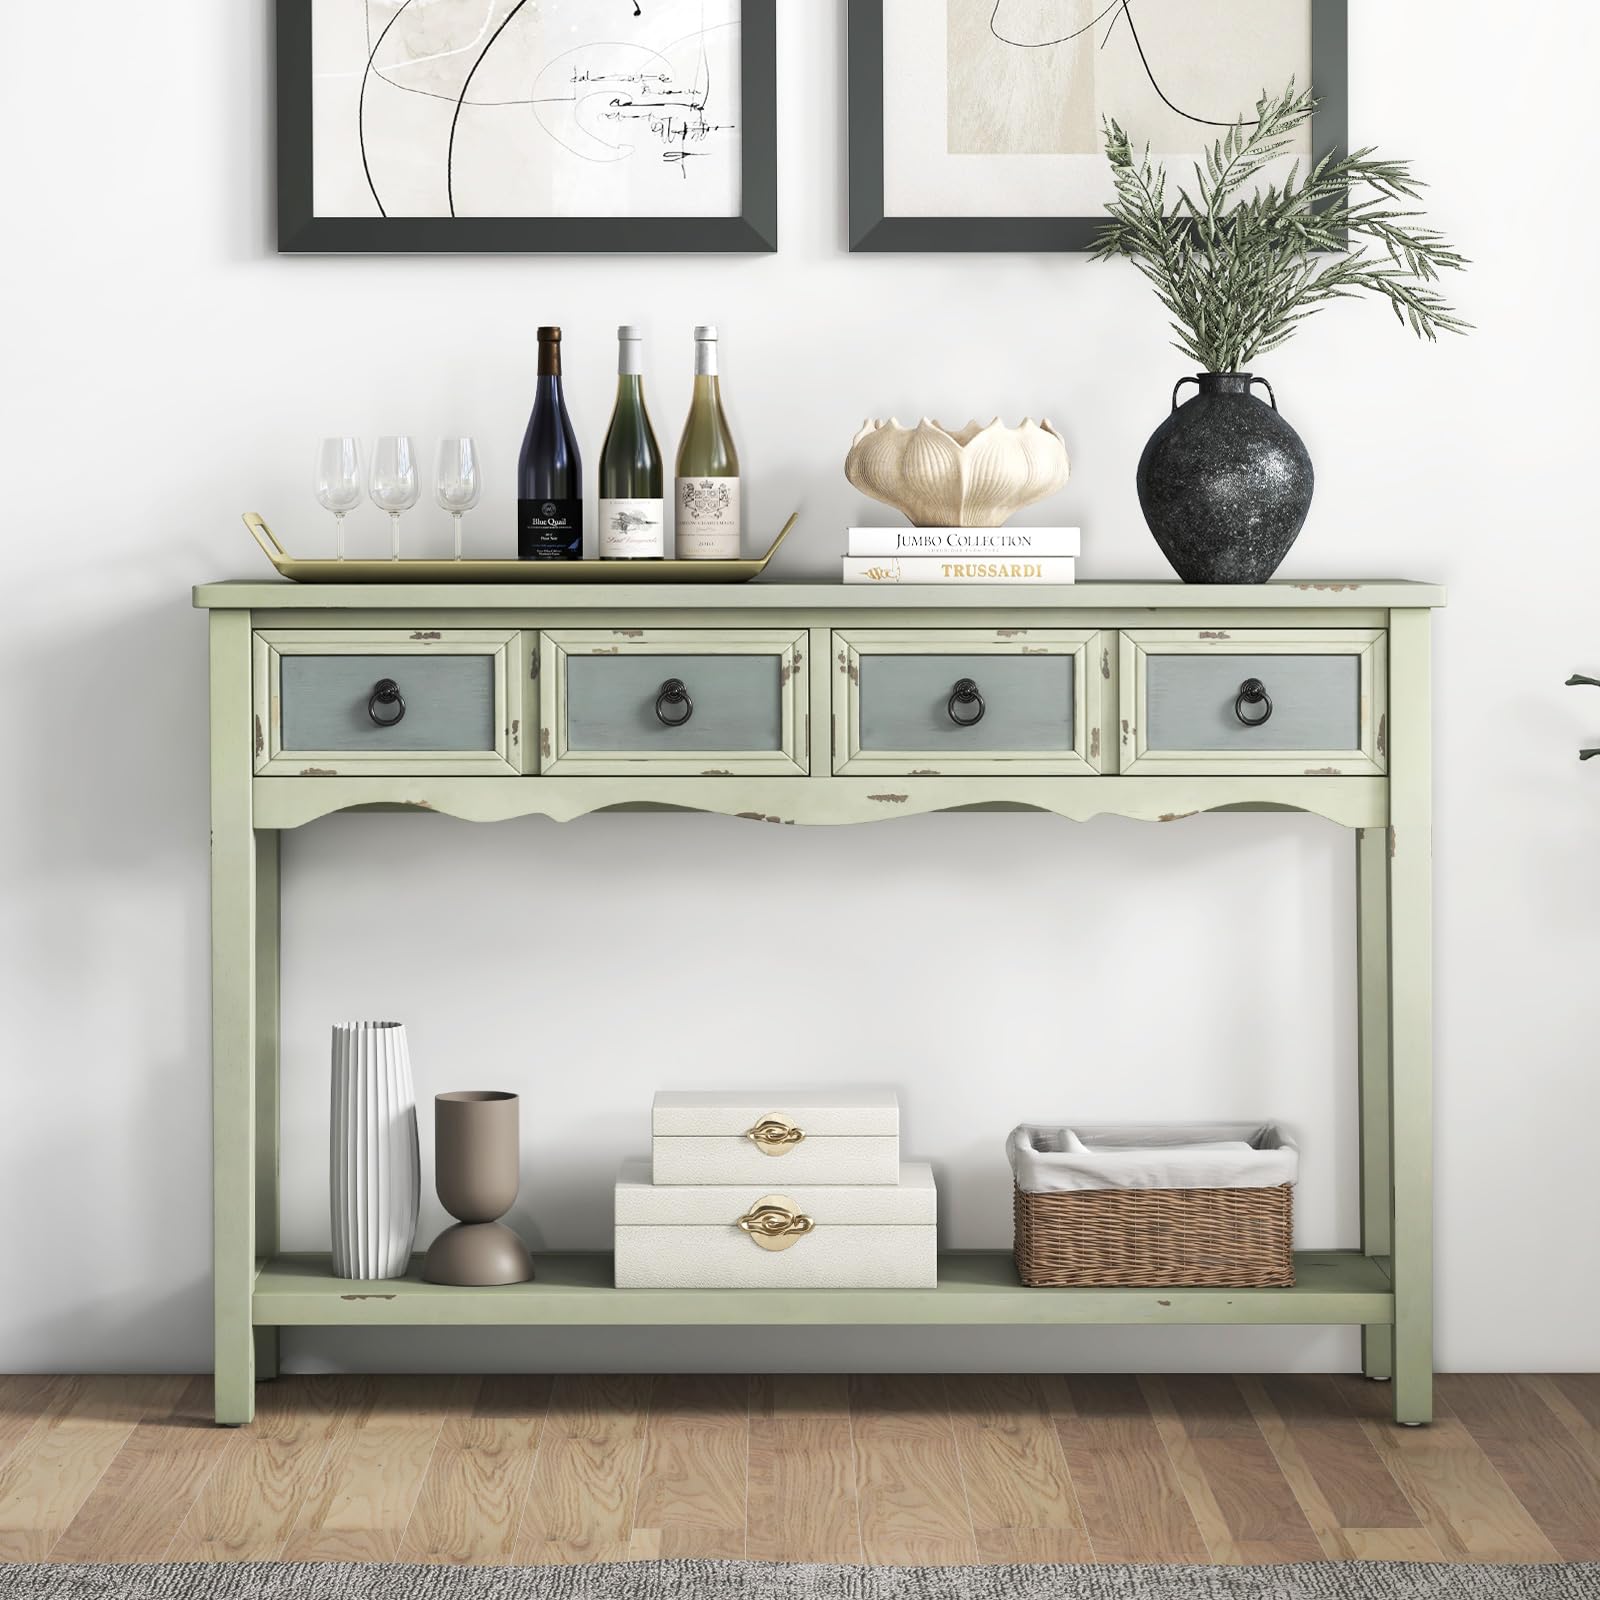 Giantex Narrow Console Table with Storage - 48” Antique Entryway Table with 4 Drawers, Open Shelf, Solid Wood Legs